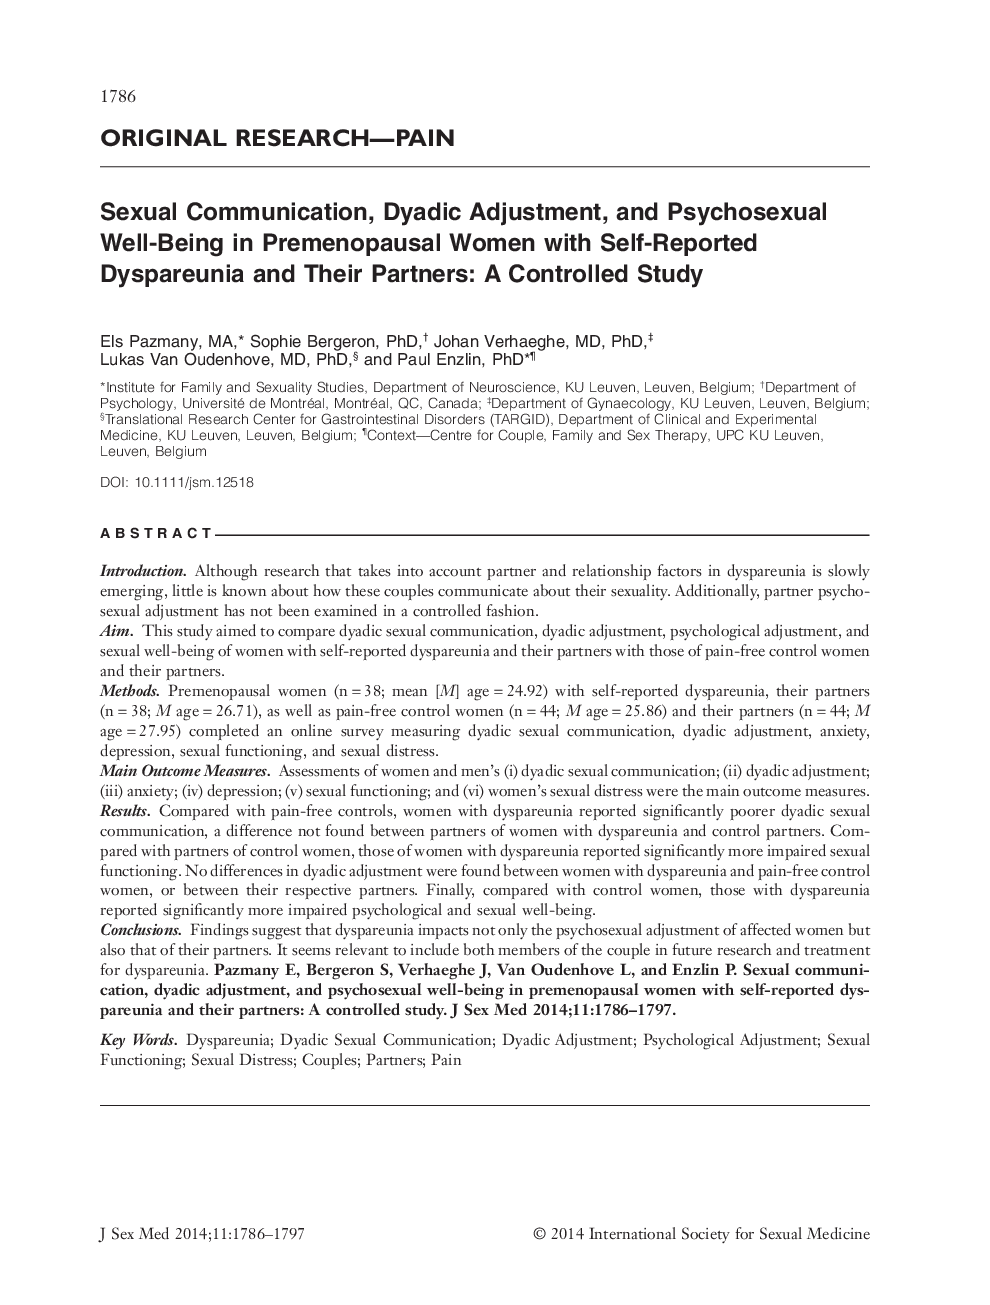 Sexual Communication, Dyadic Adjustment, and Psychosexual Well‐Being in Premenopausal Women with Self‐Reported Dyspareunia and Their Partners: A Controlled Study 